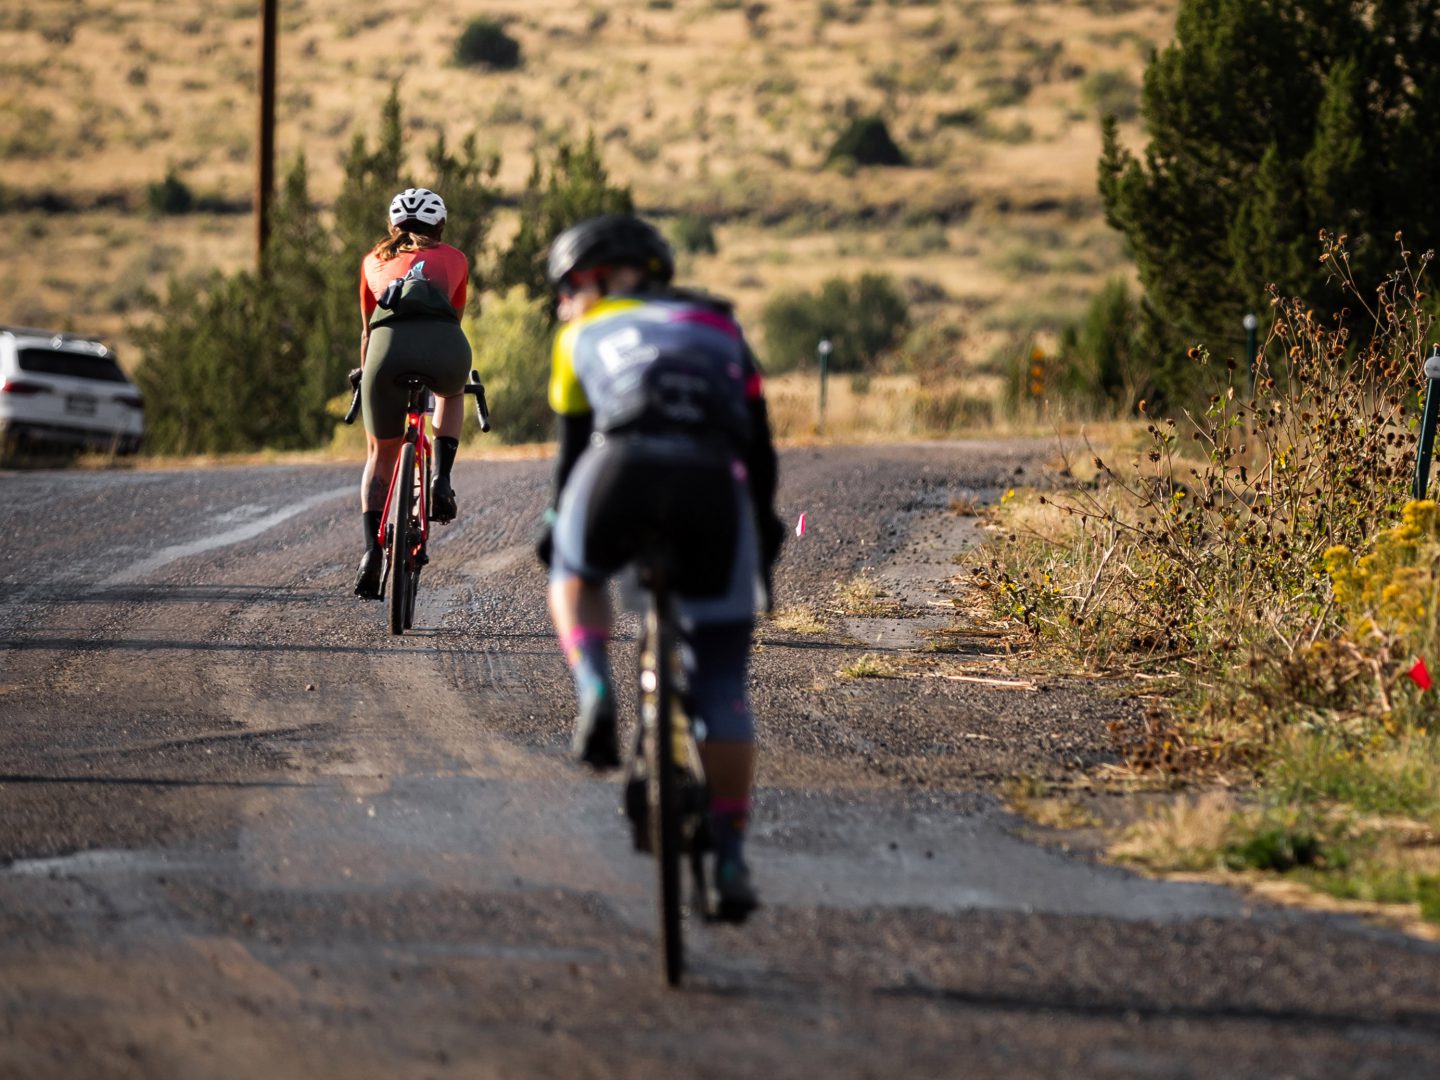 Riders on a rough pavement and gravel road